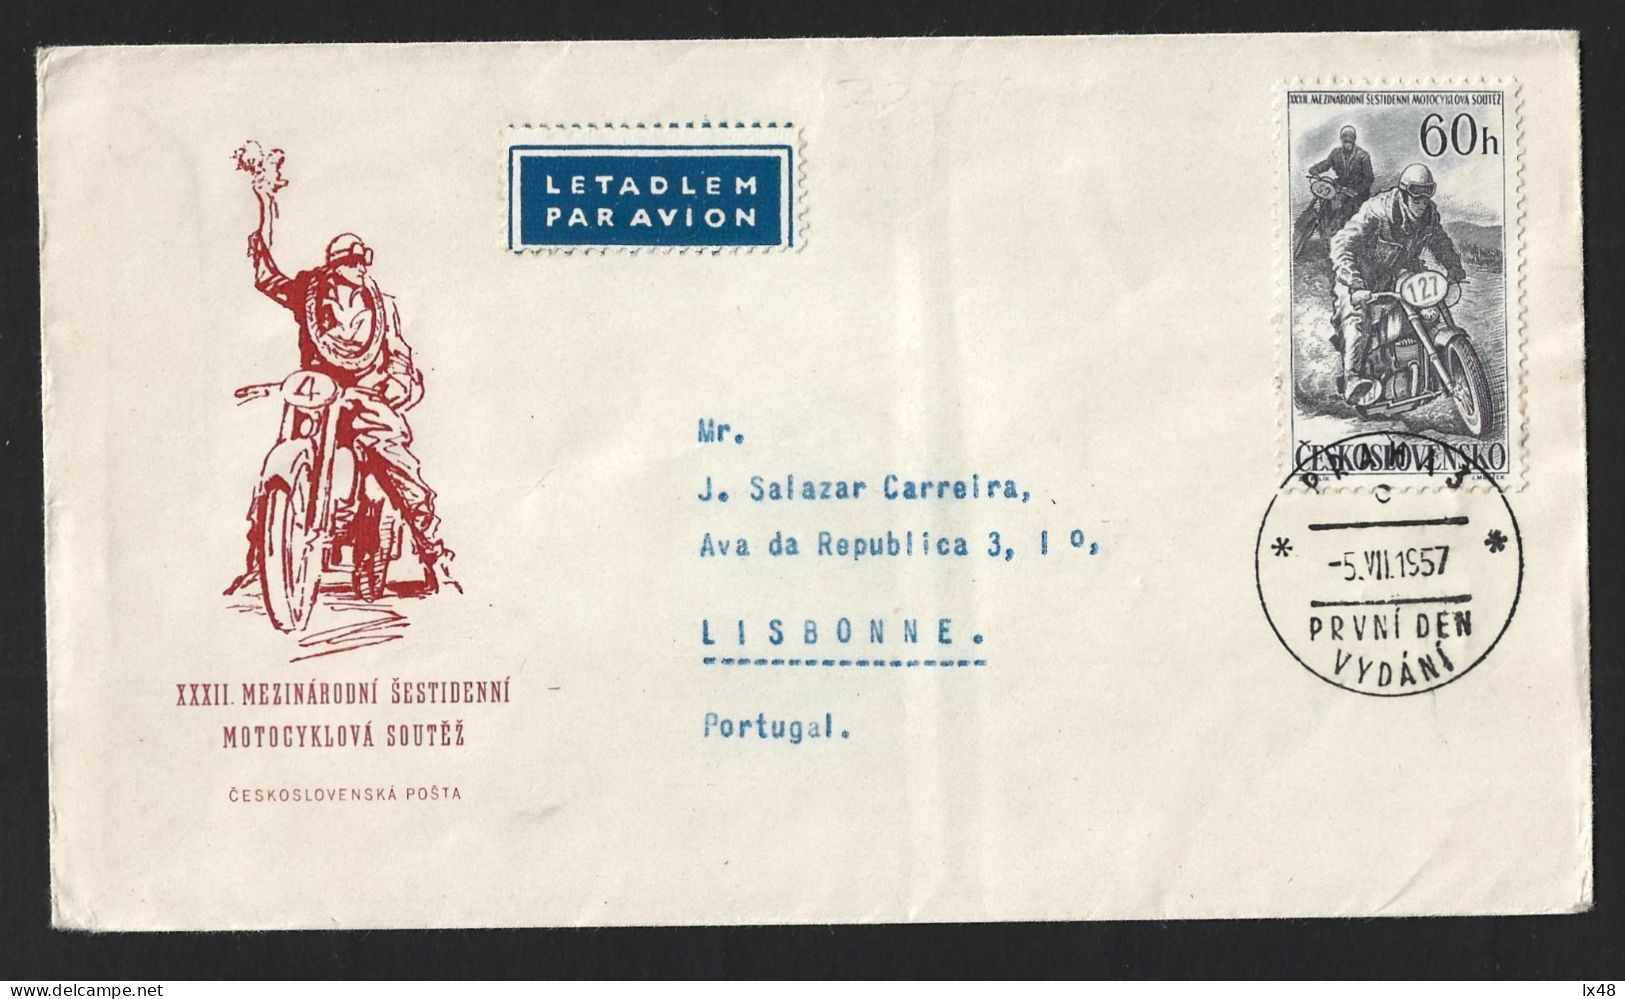 Moto Racing In Prague, Czechoslovakia. 32 1957 International Motorcycle Race. Motorcycles. Letter With Additional Ivan O - Moto